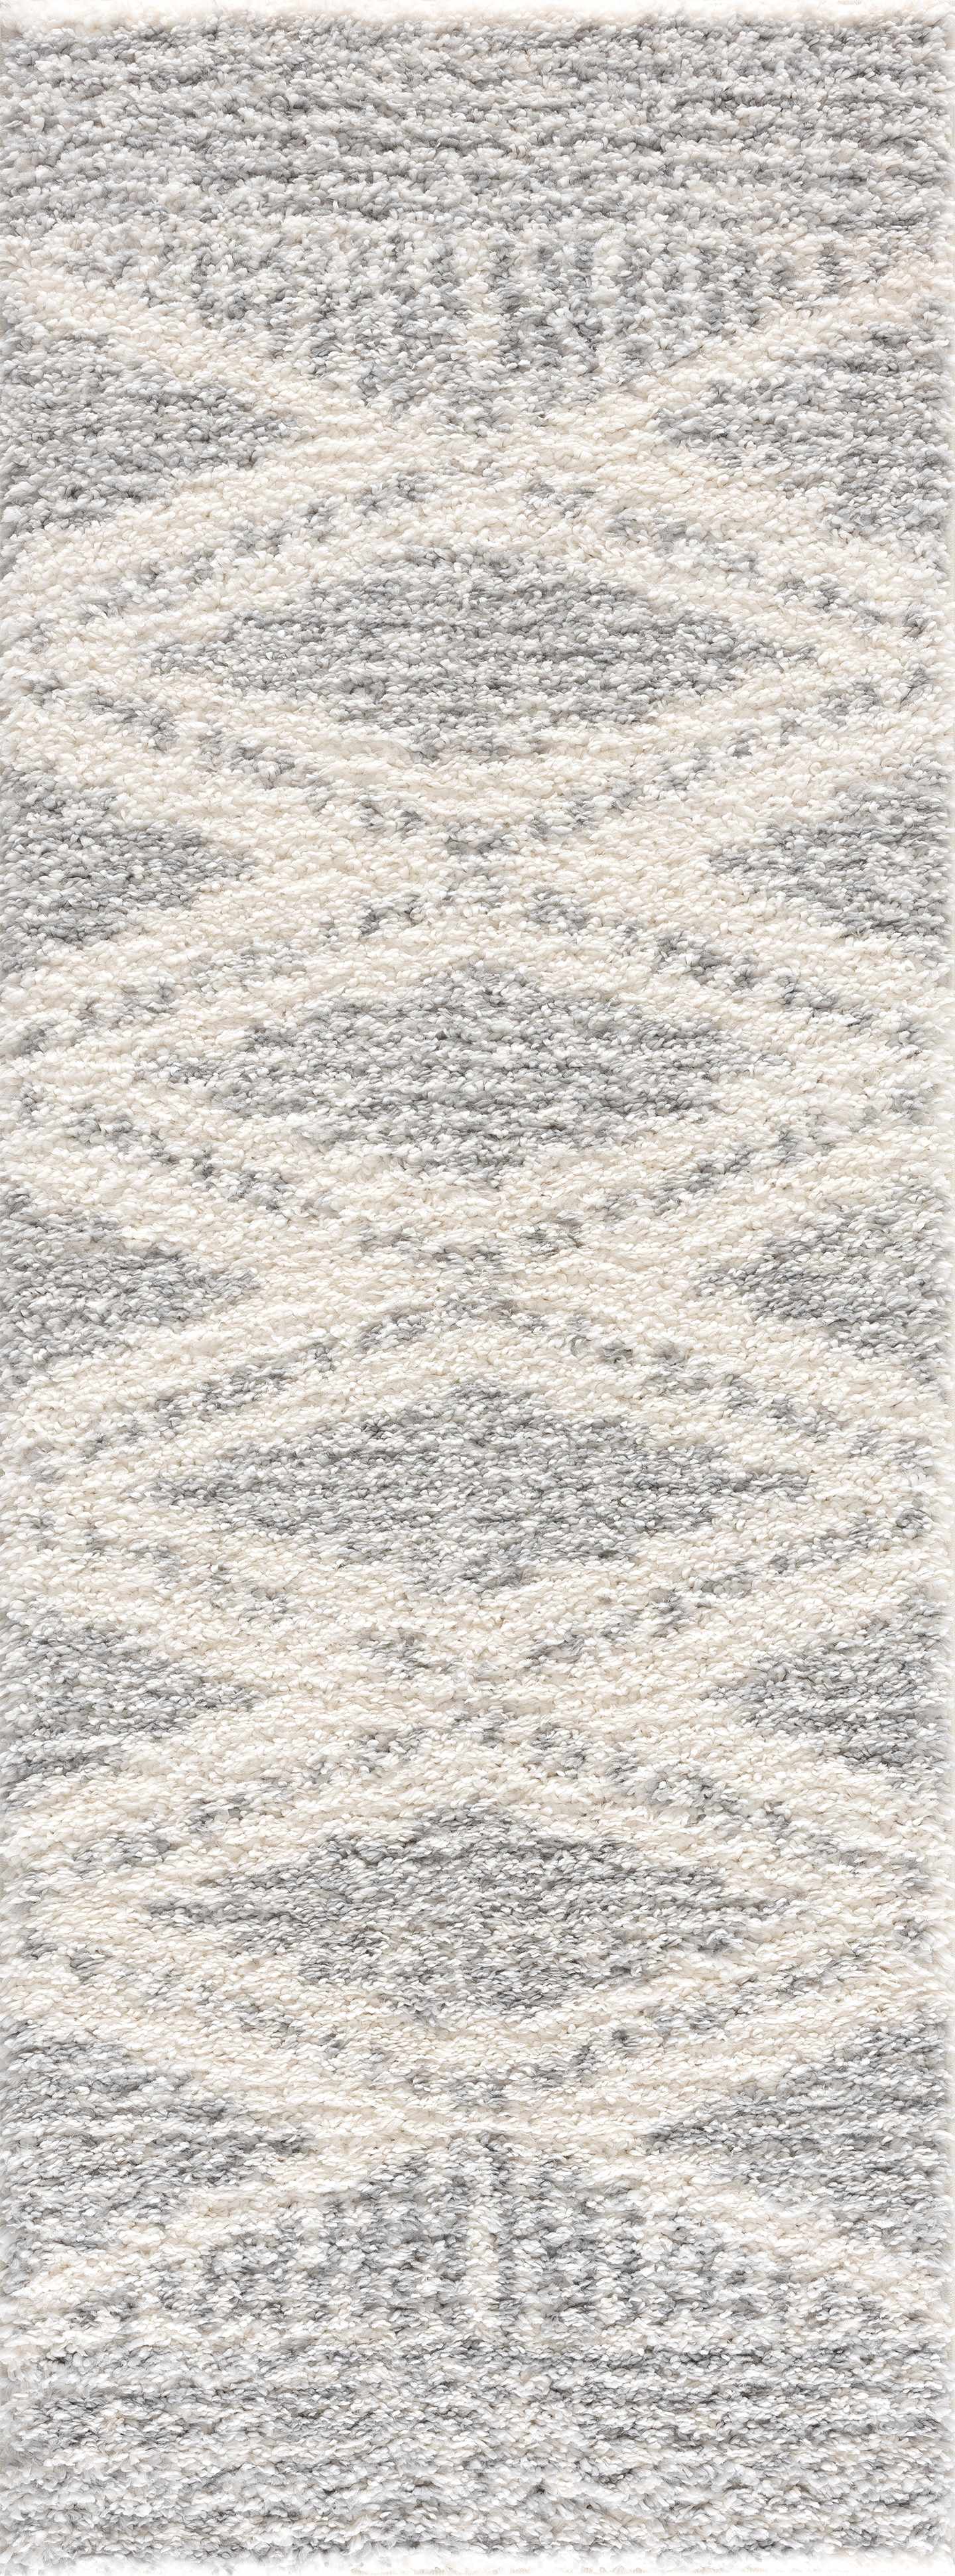 Boutique Rugs Rugs 2'7" x 7'3" Runner Trunding Plush Area Rug in Gray